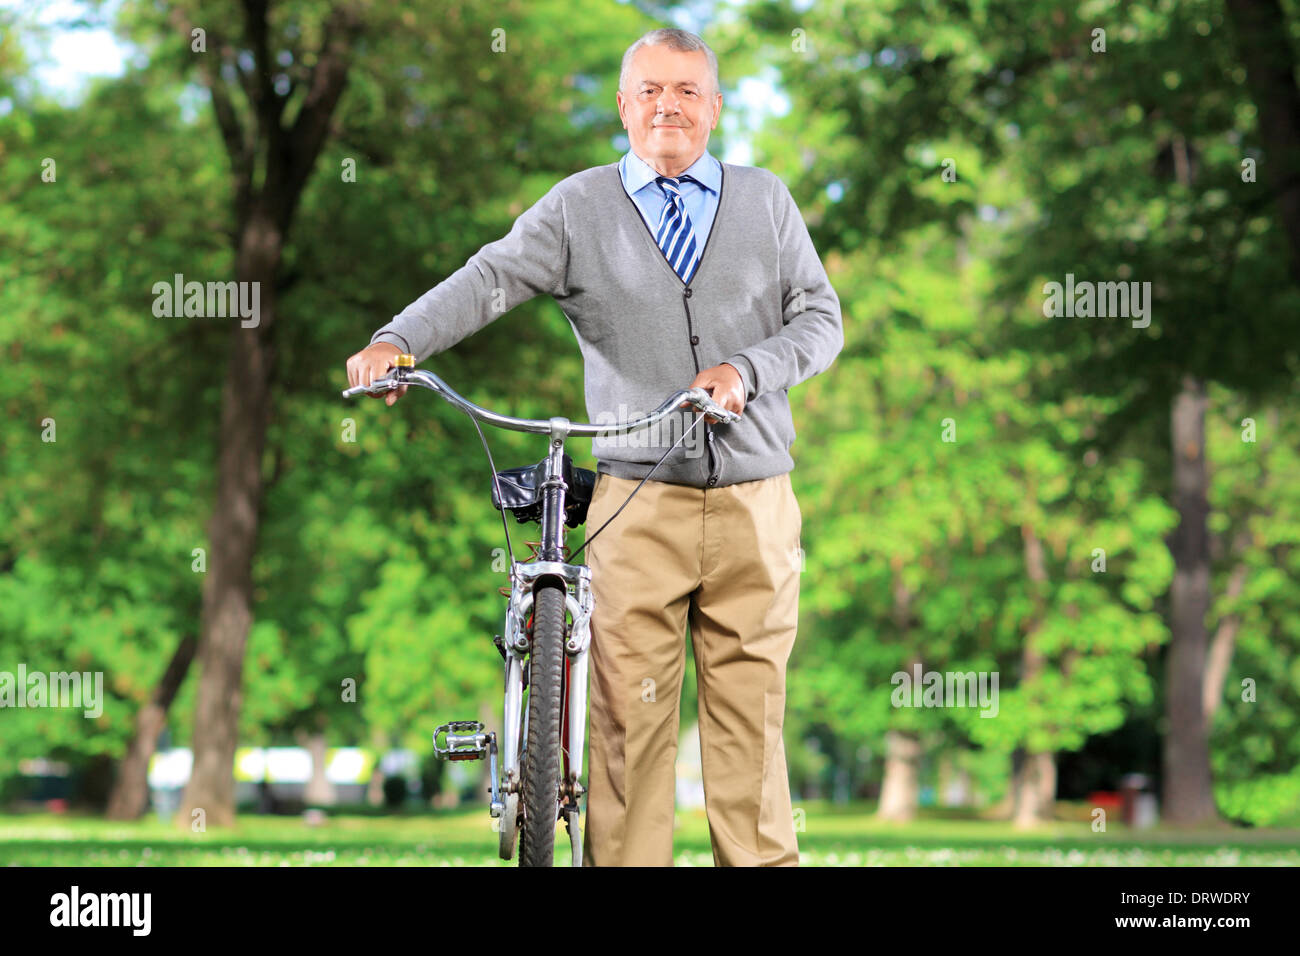 Mature man with his bicycle in a park Stock Photo